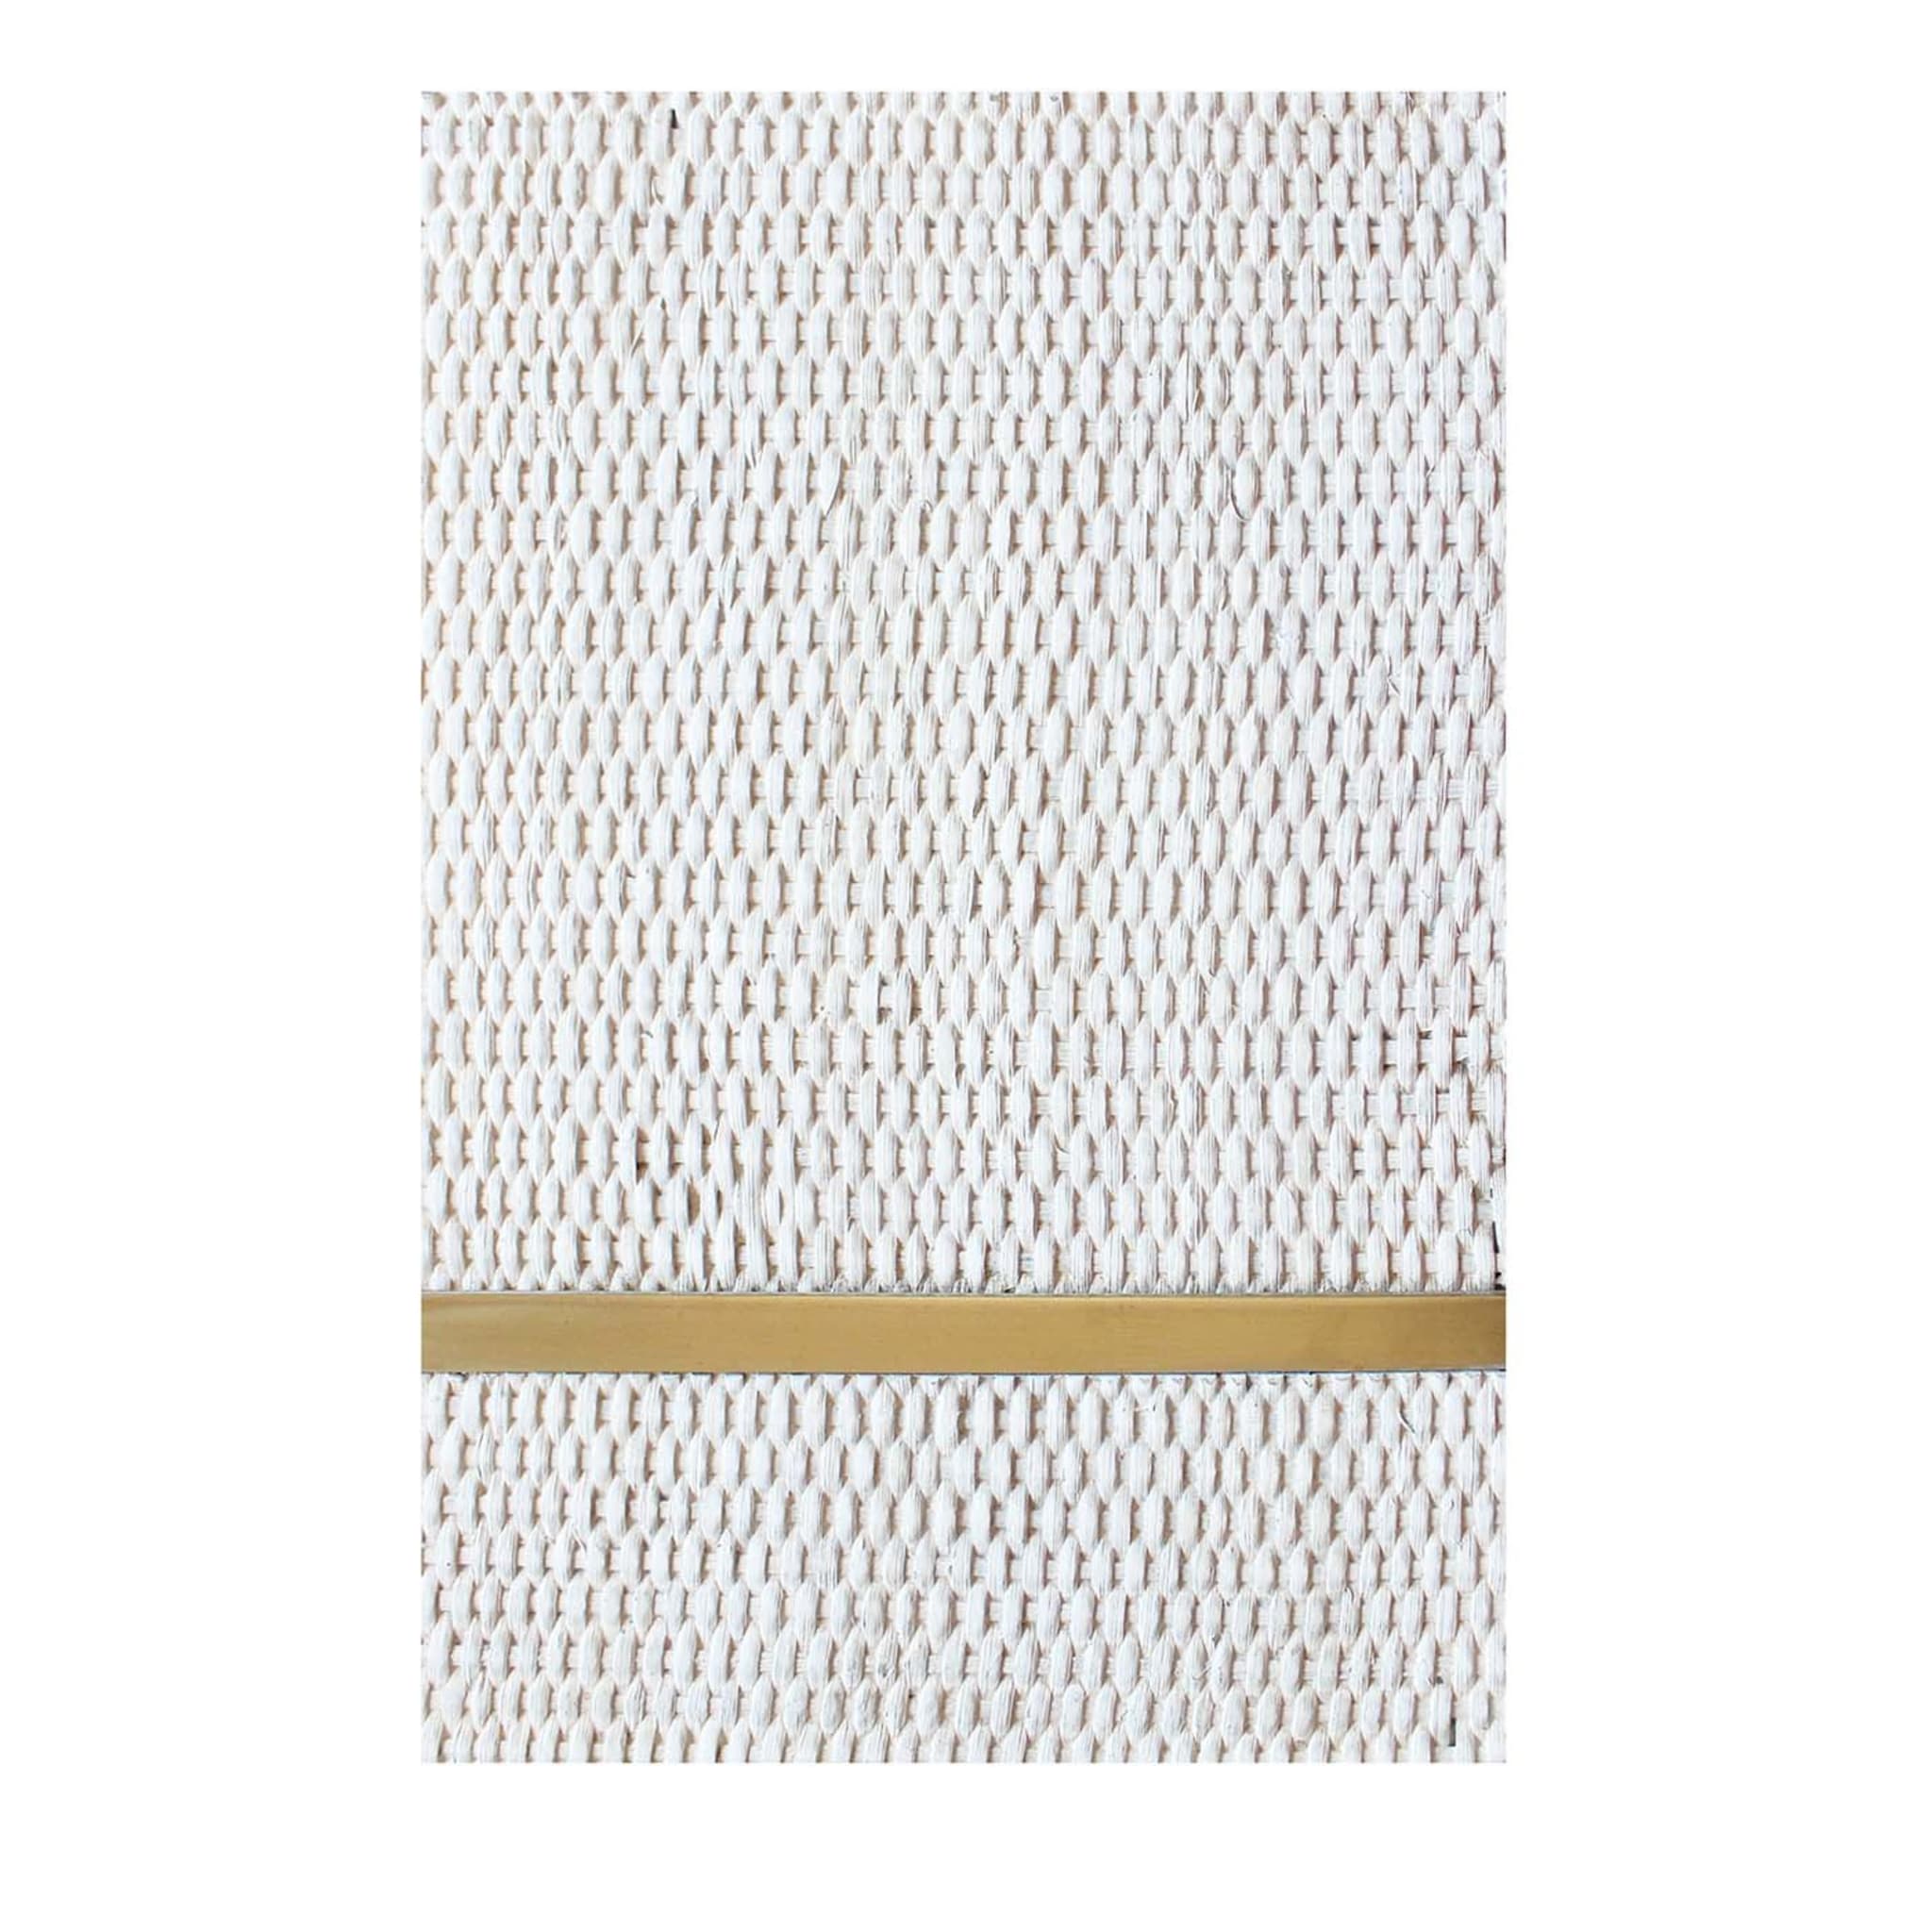 Paille-Intrec Kaf.21 Woven Straw Decorative Panel  - Main view